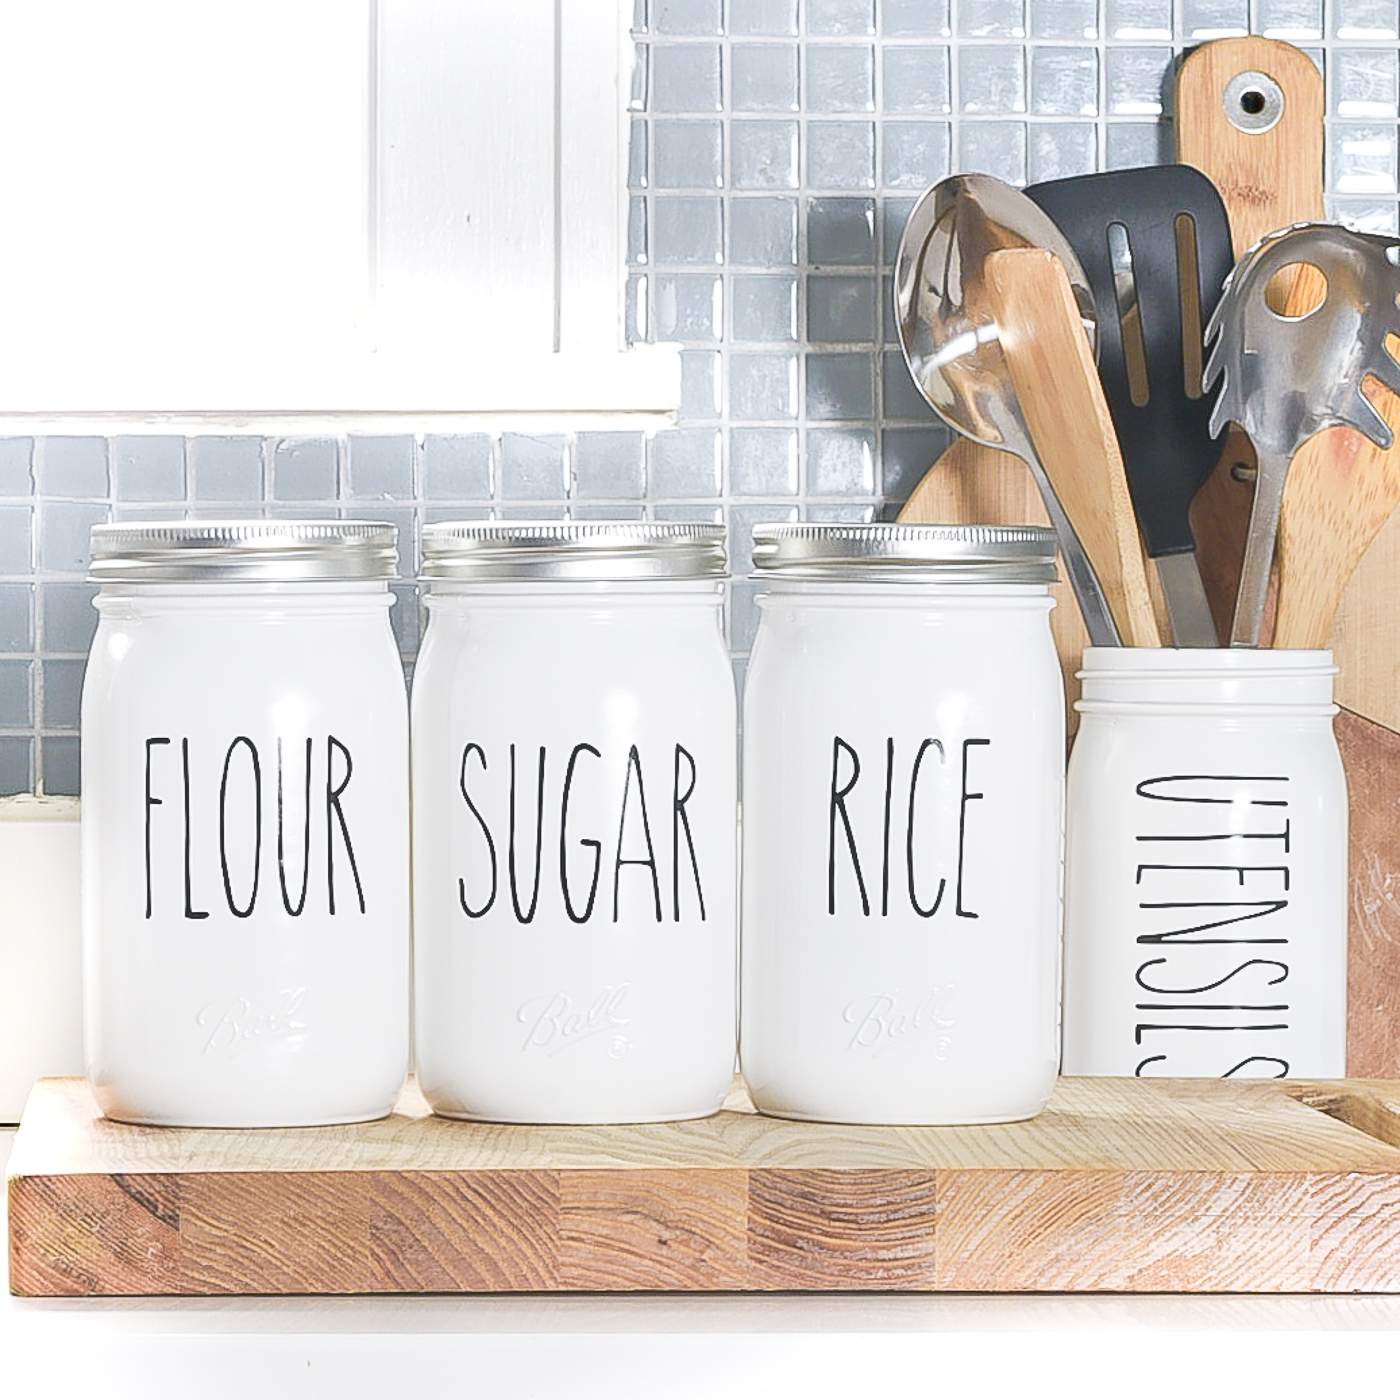 https://www.itallstartedwithpaint.com/wp-content/uploads/2020/05/rae-dunn-inspired-canisters-kitchen-canisters-white-23-of-24.jpg